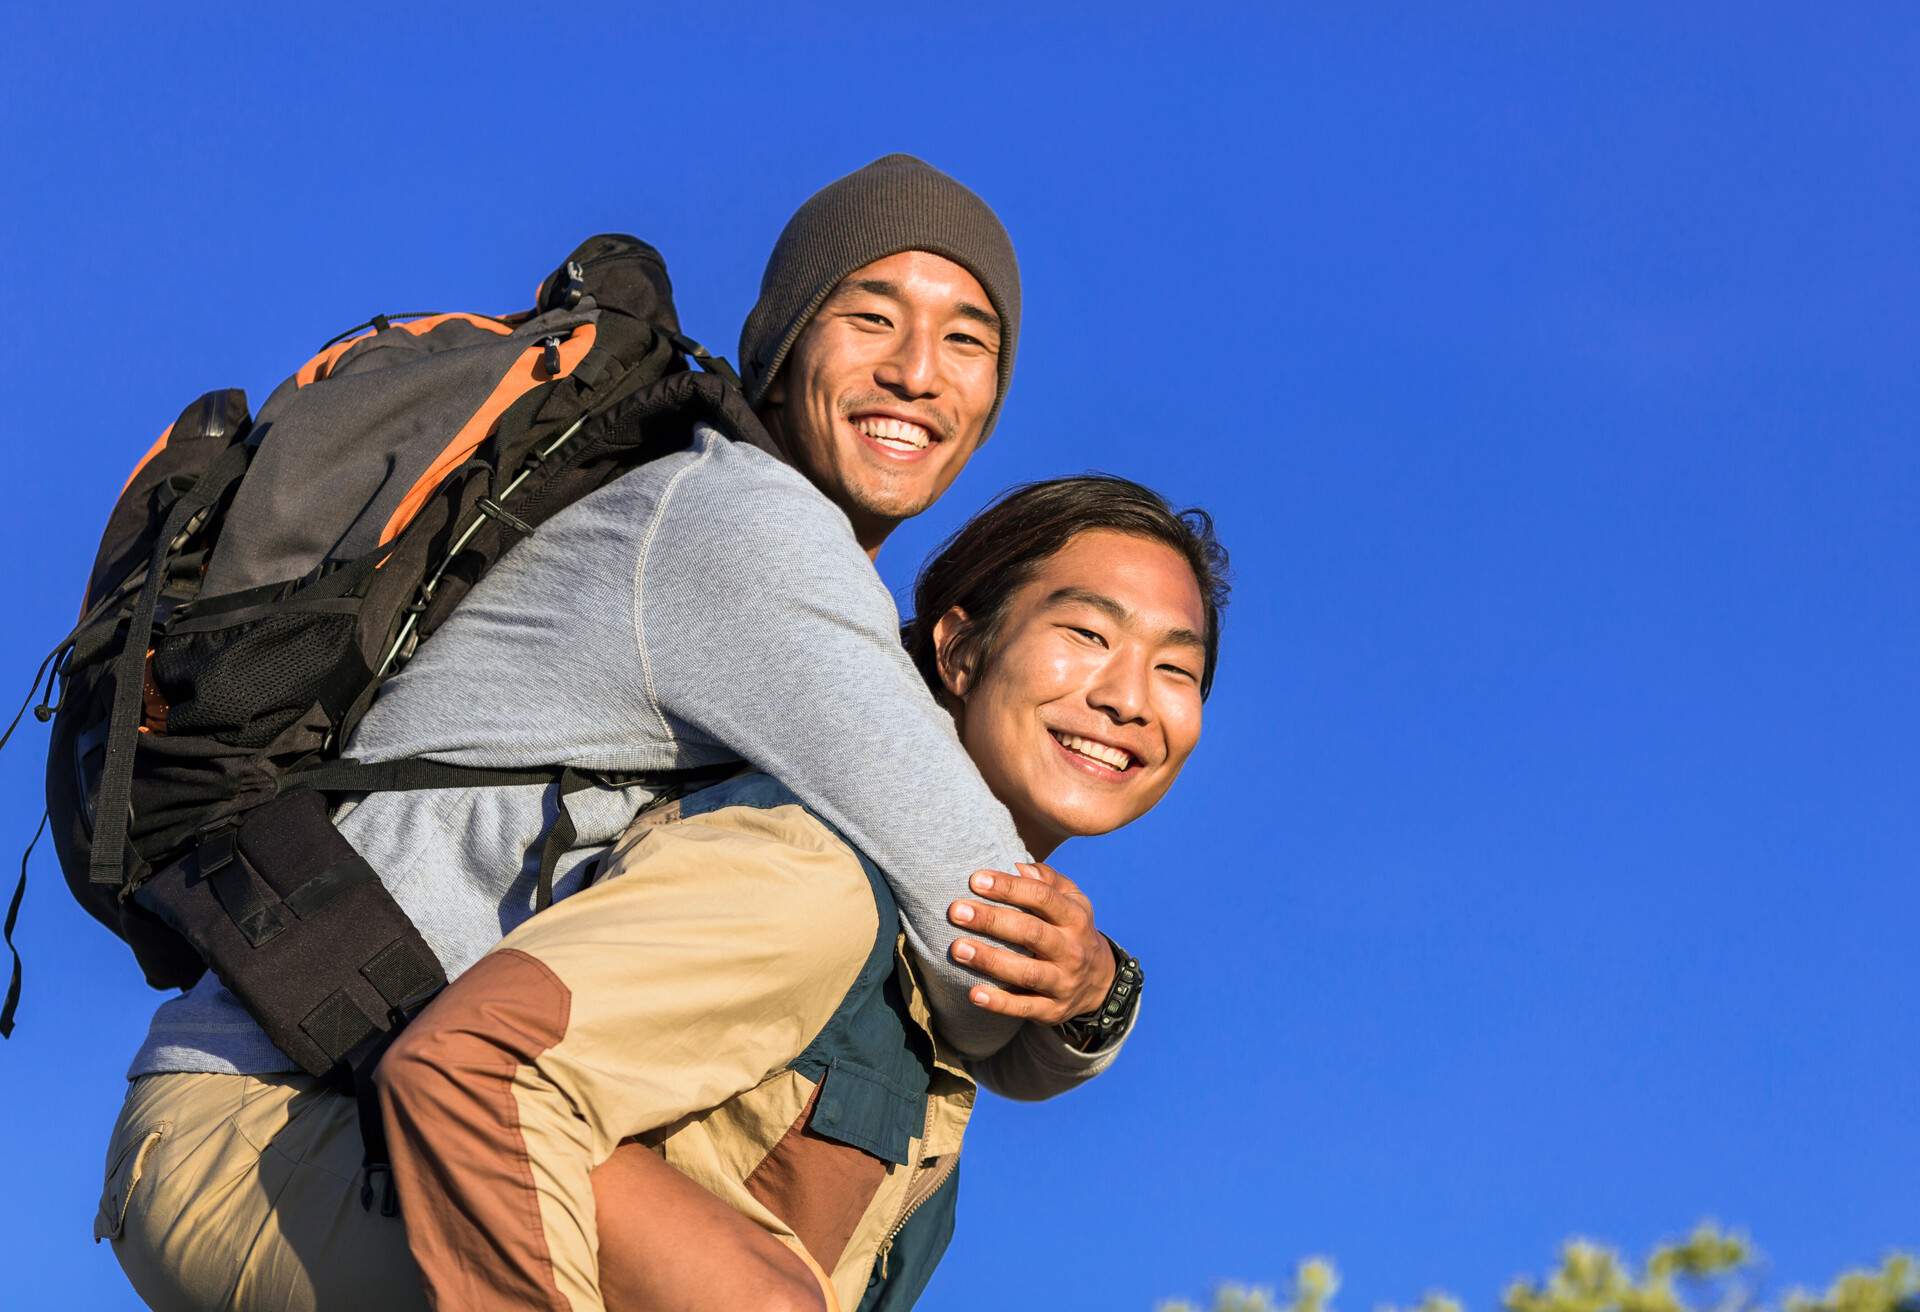 A photo of hiker giving piggyback ride to boyfriend. Portrait of happy men are against clear blue sky. Young males are in casuals. They are enjoying their weekends.